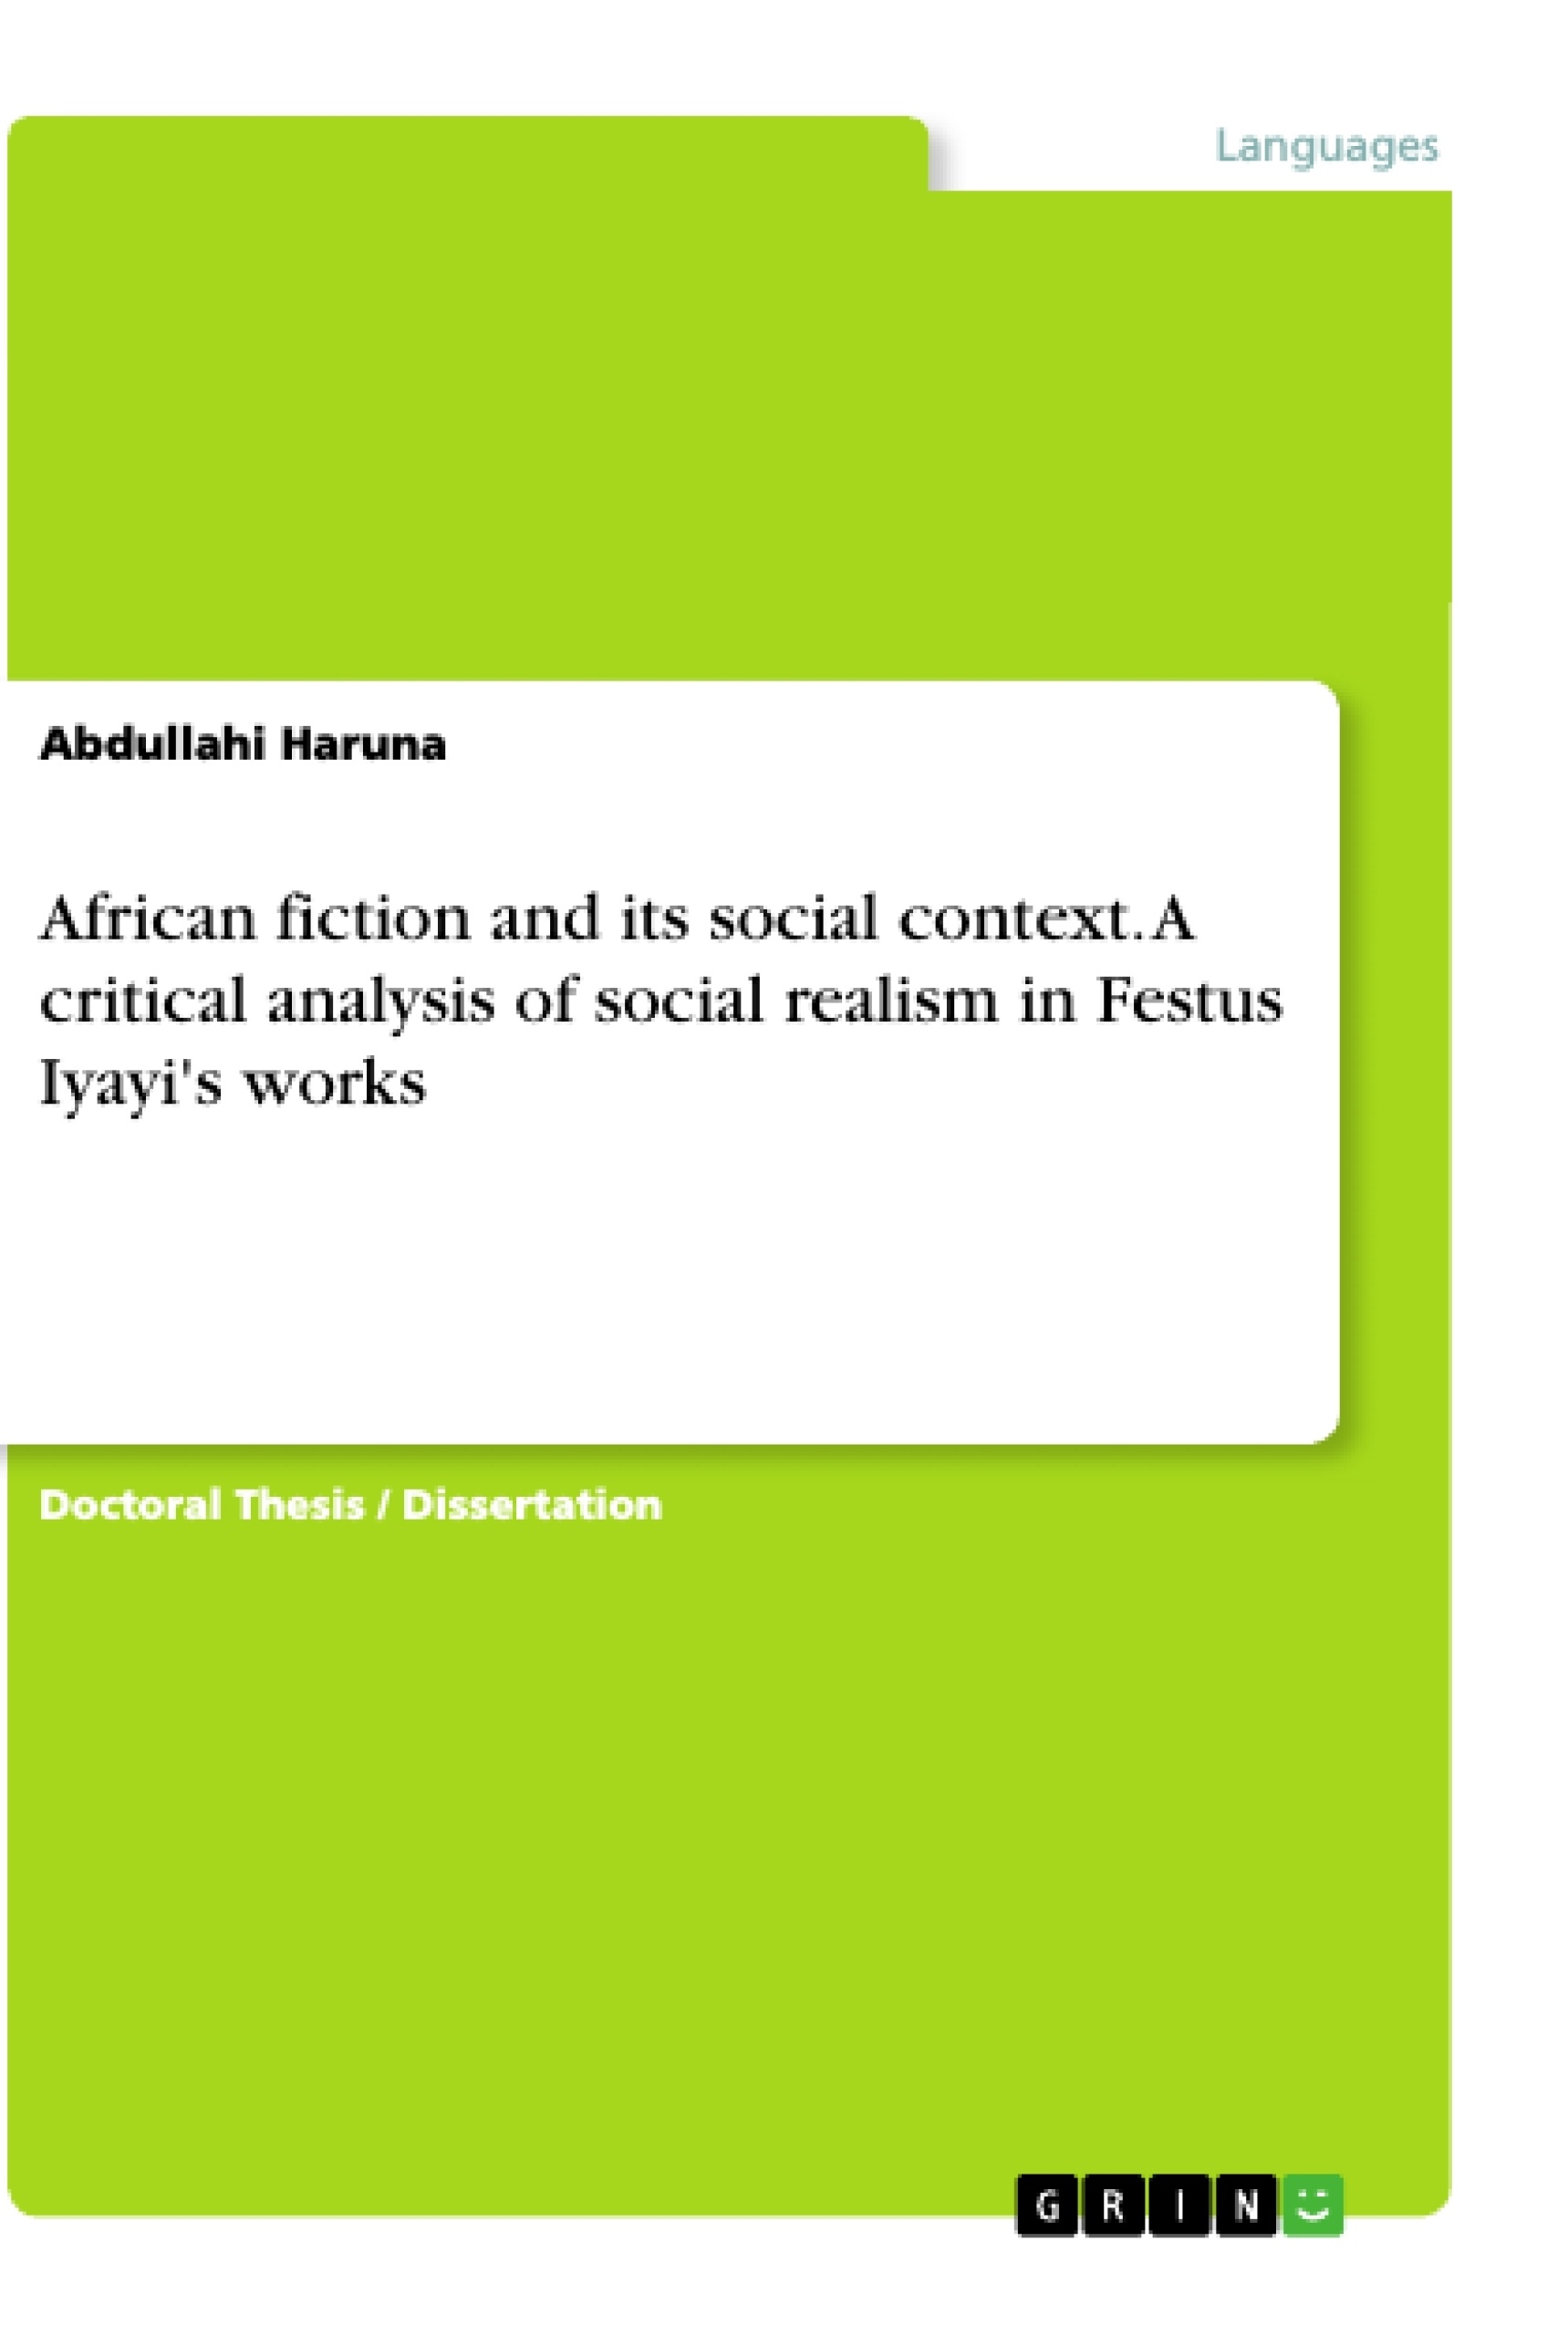 Título: African fiction and its social context. A critical analysis of social realism in Festus Iyayi's works